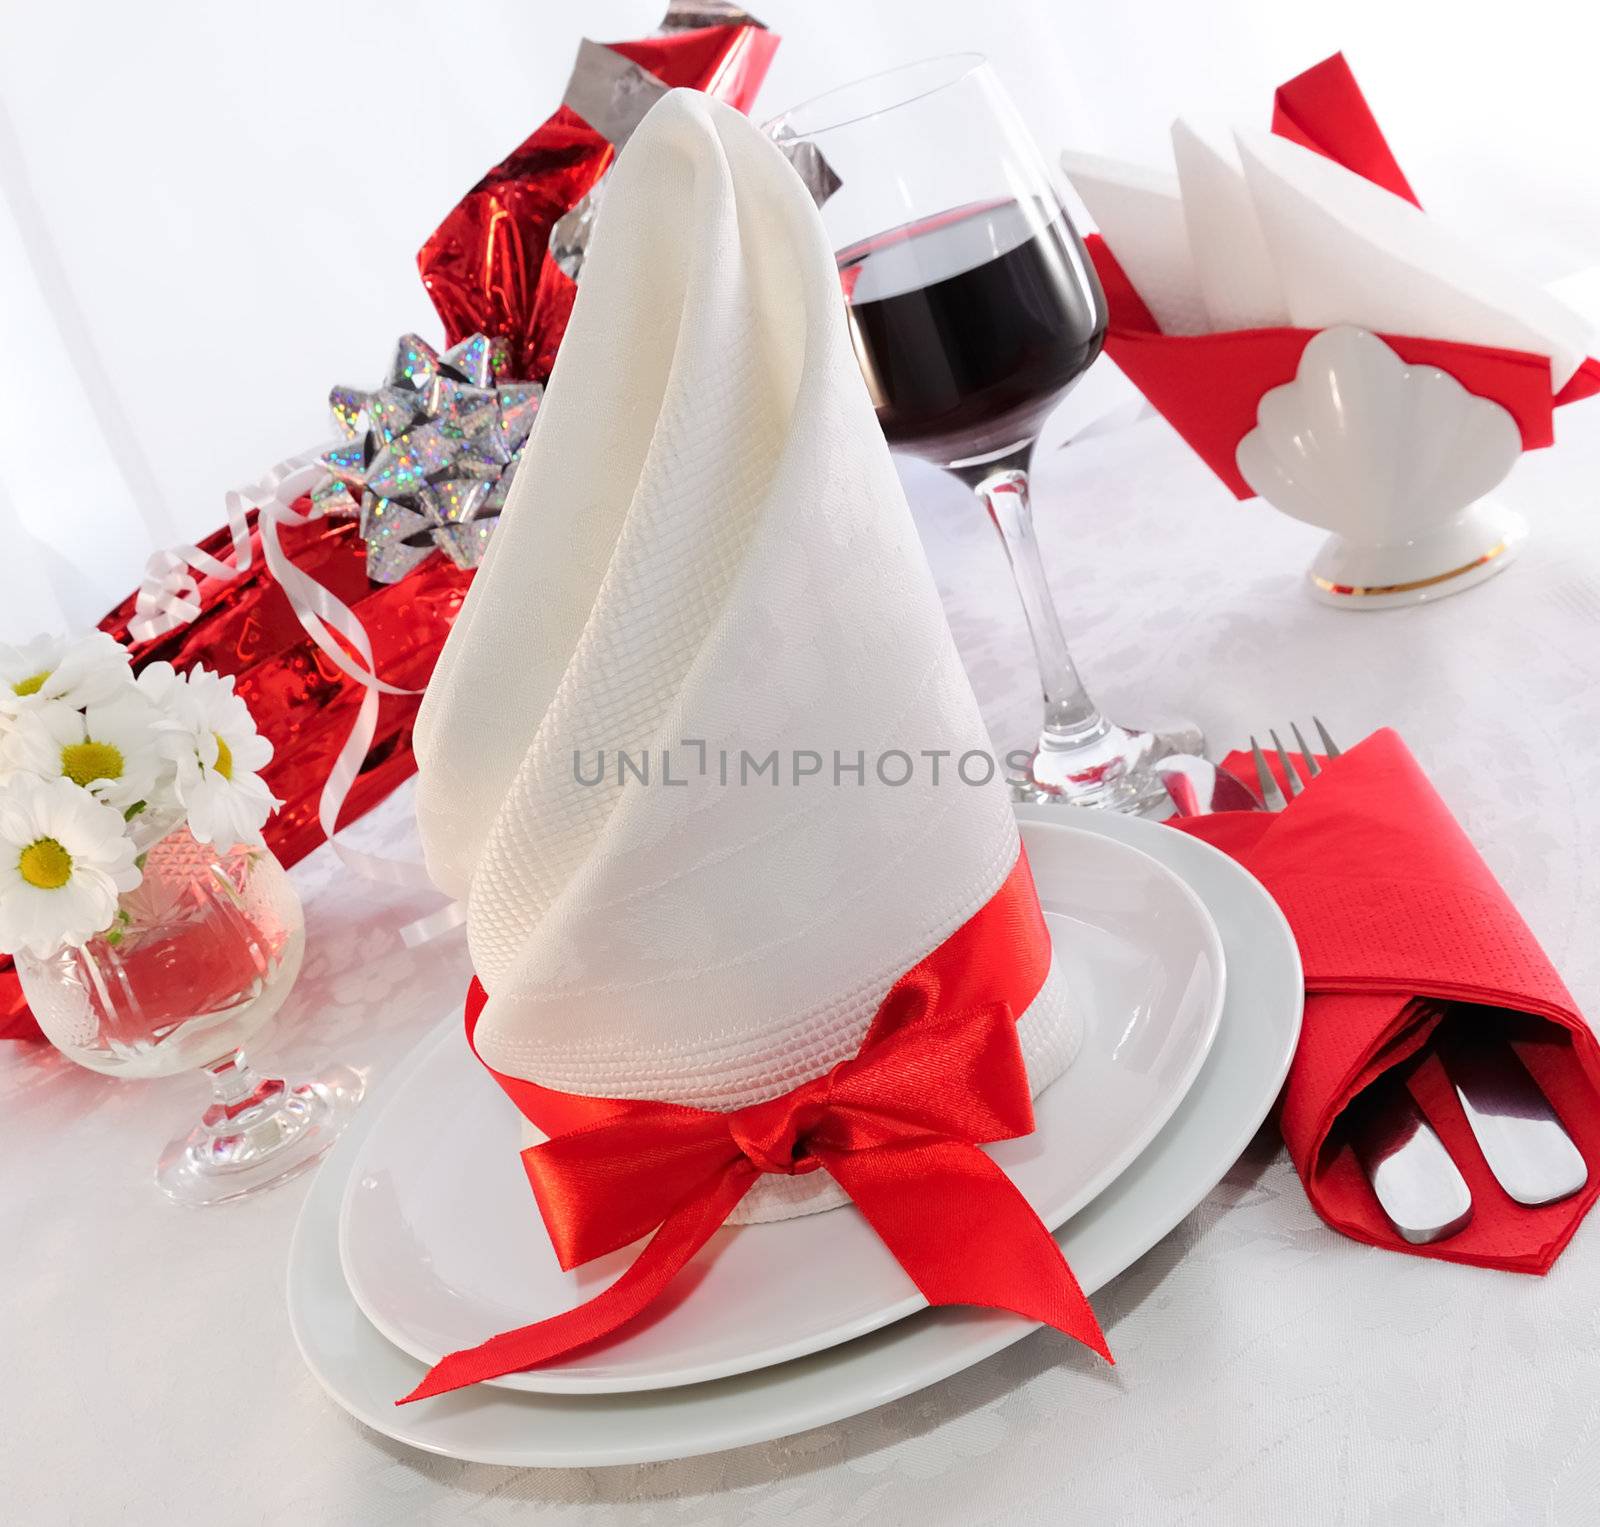 Table setting for a holiday napkin, flowers, wine